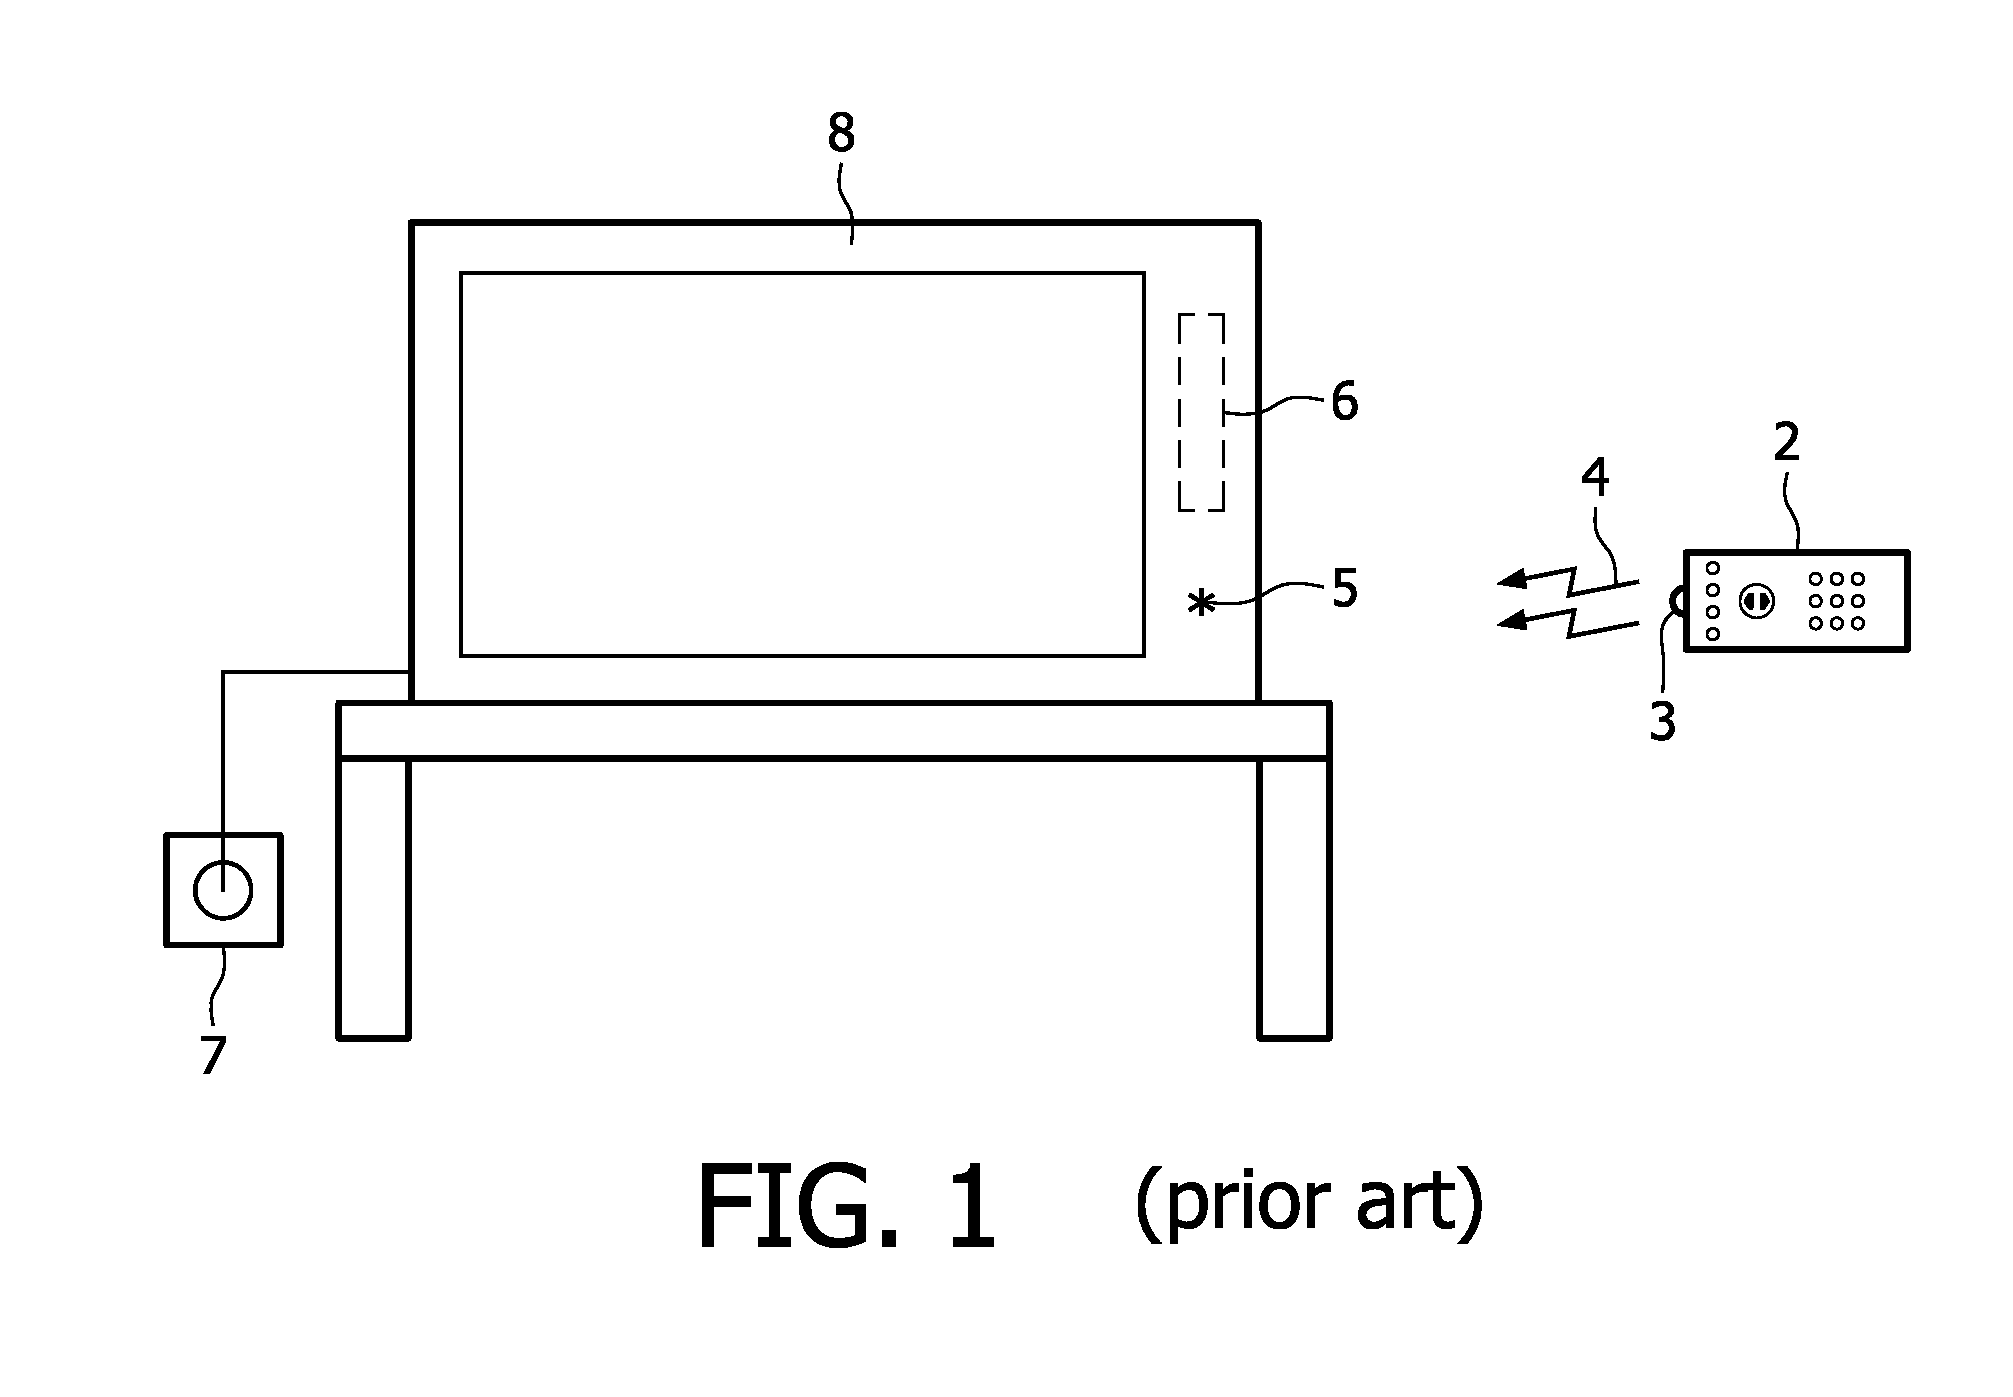 Method of actuating a switch between a device and a power supply